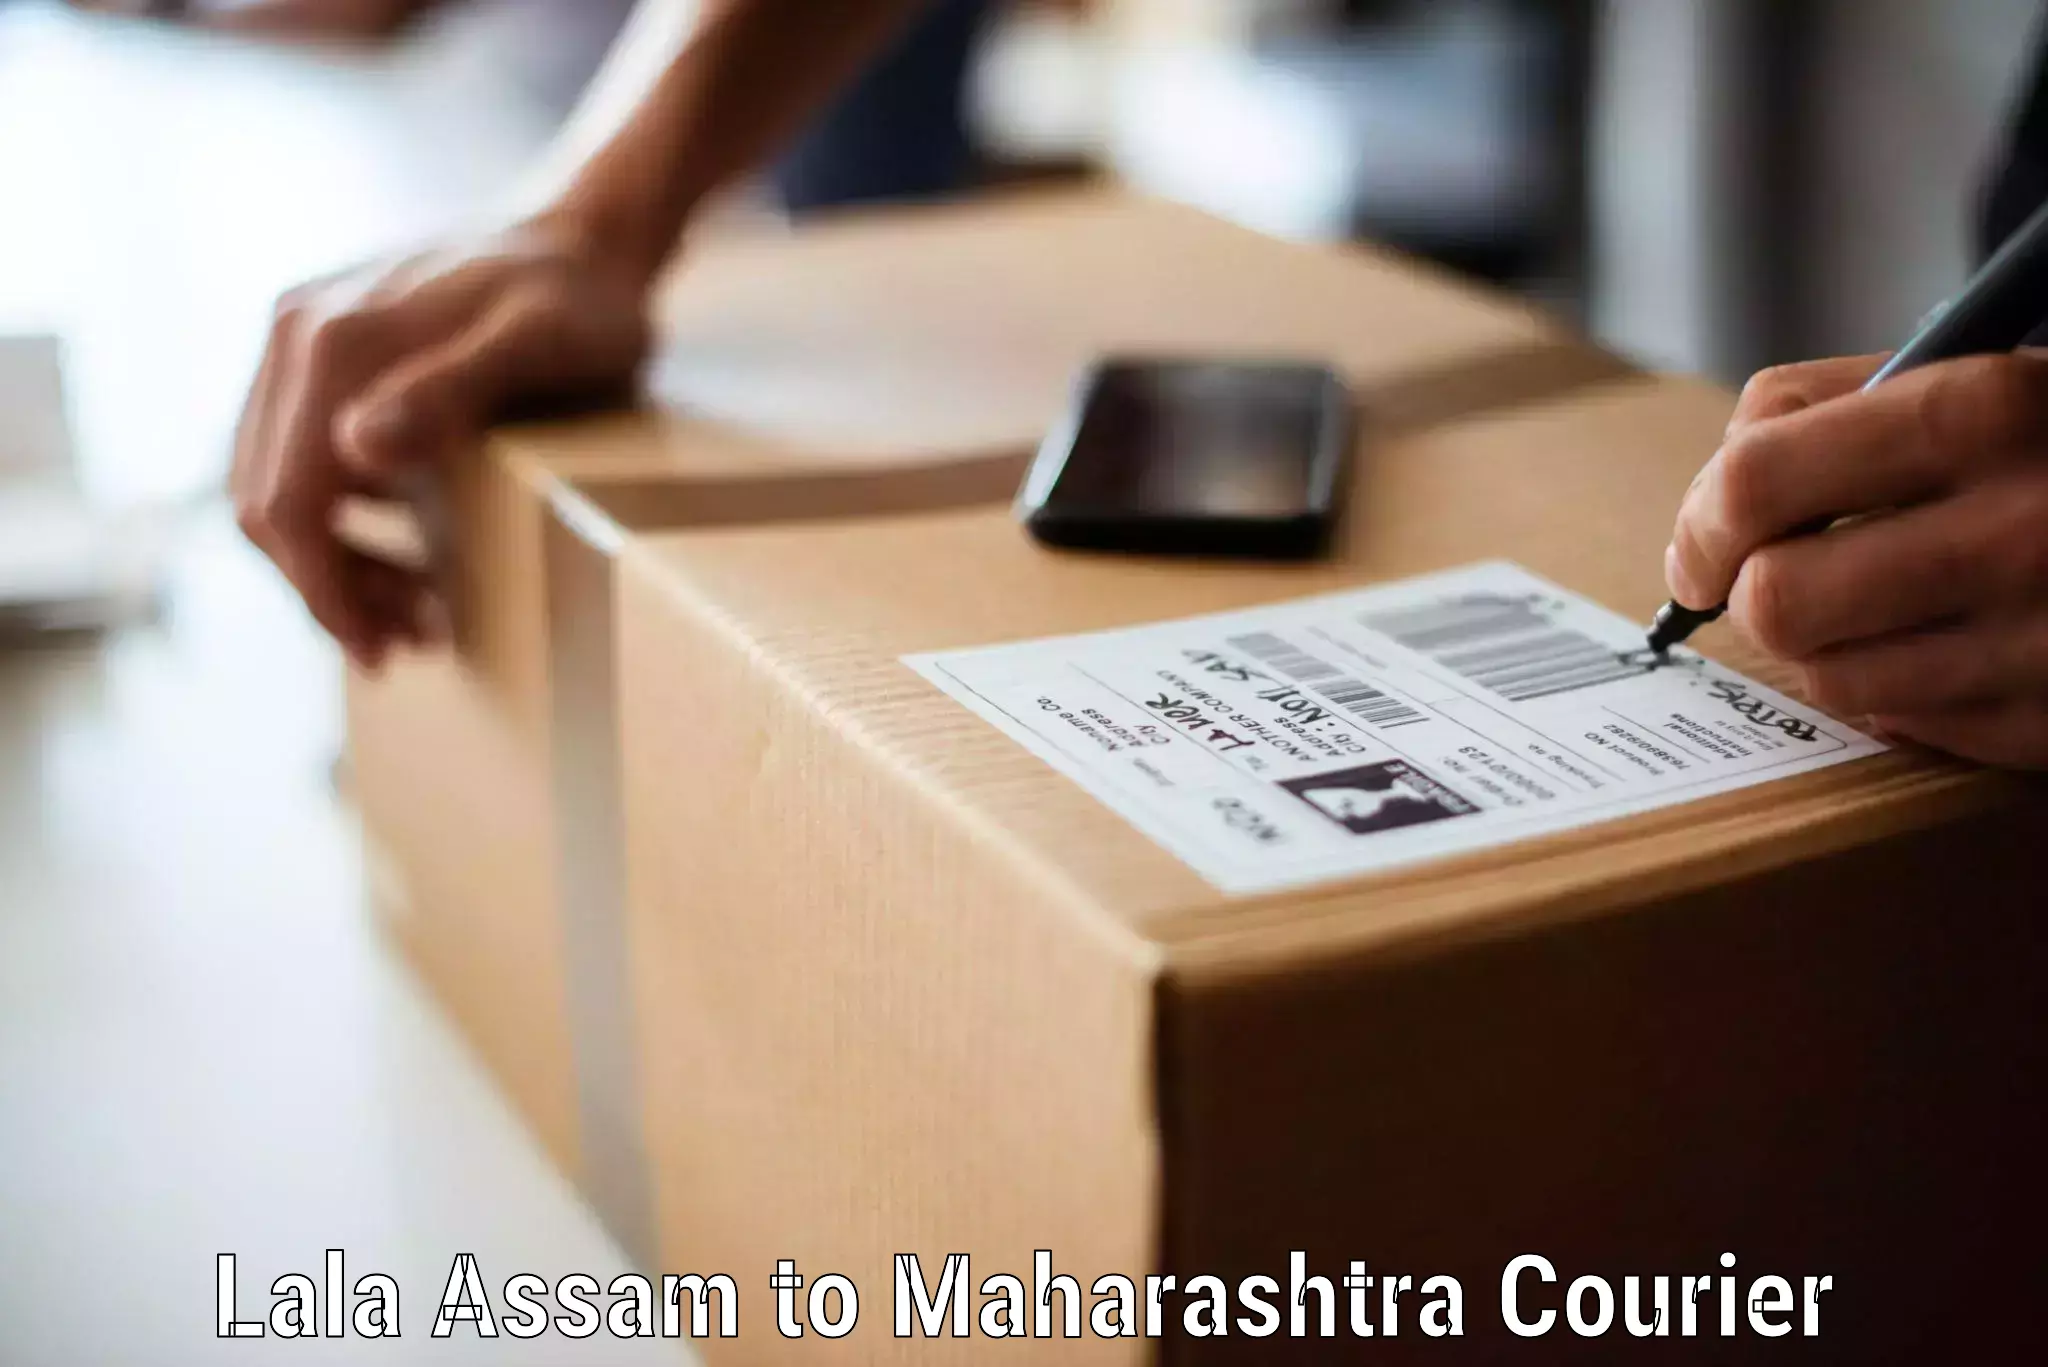 Dependable moving services in Lala Assam to Mumbai